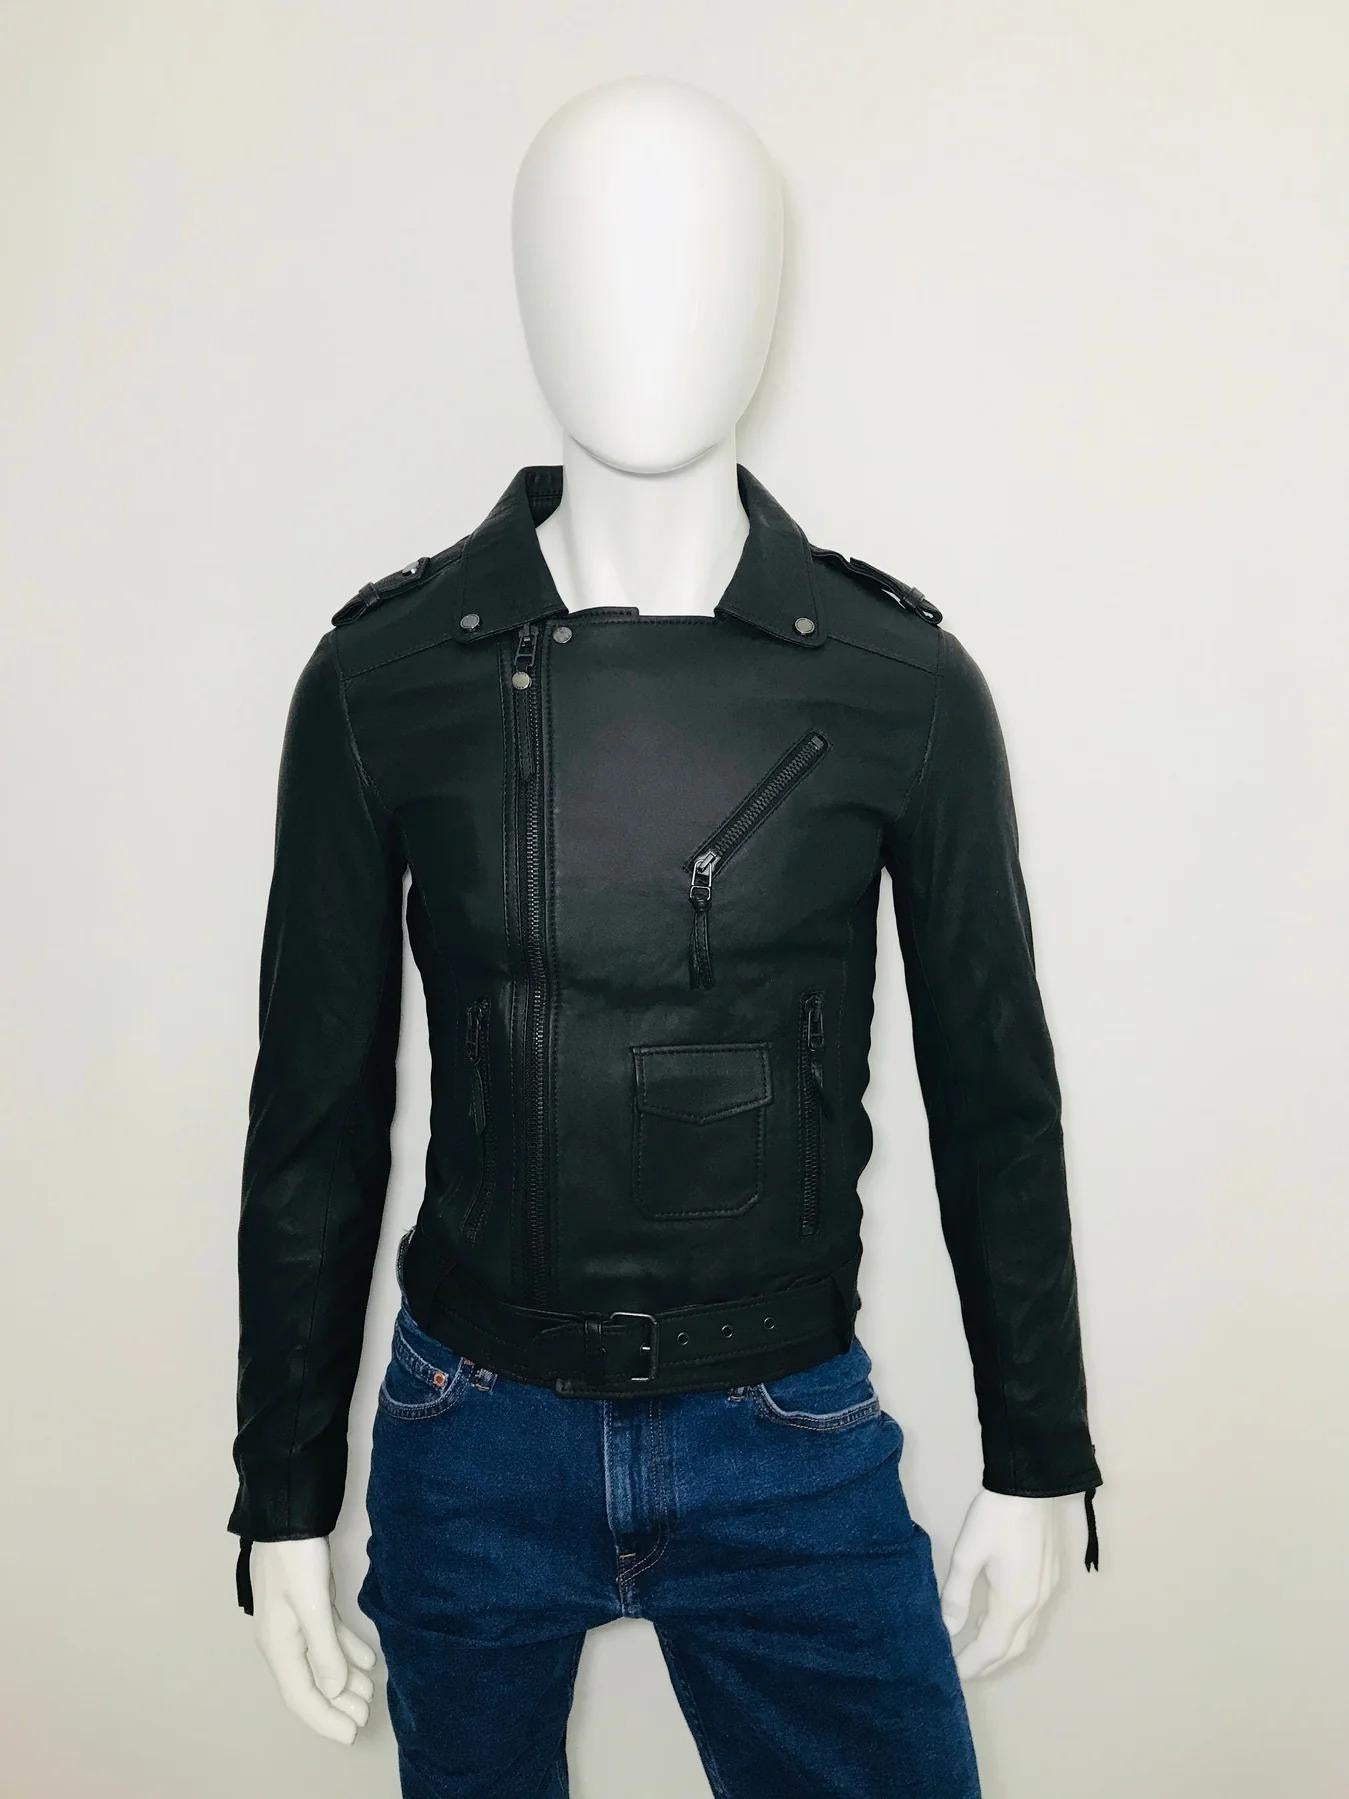 Boda Skins Black Biker Jacket Crafted from Sheepskin Leather

Fully lined, signature black hardware. Side zip fastening, three zip pockets and one front flap pocket. Belted lower hem, shoulder epaulettes.

Additional information:
Size – XS
Condition